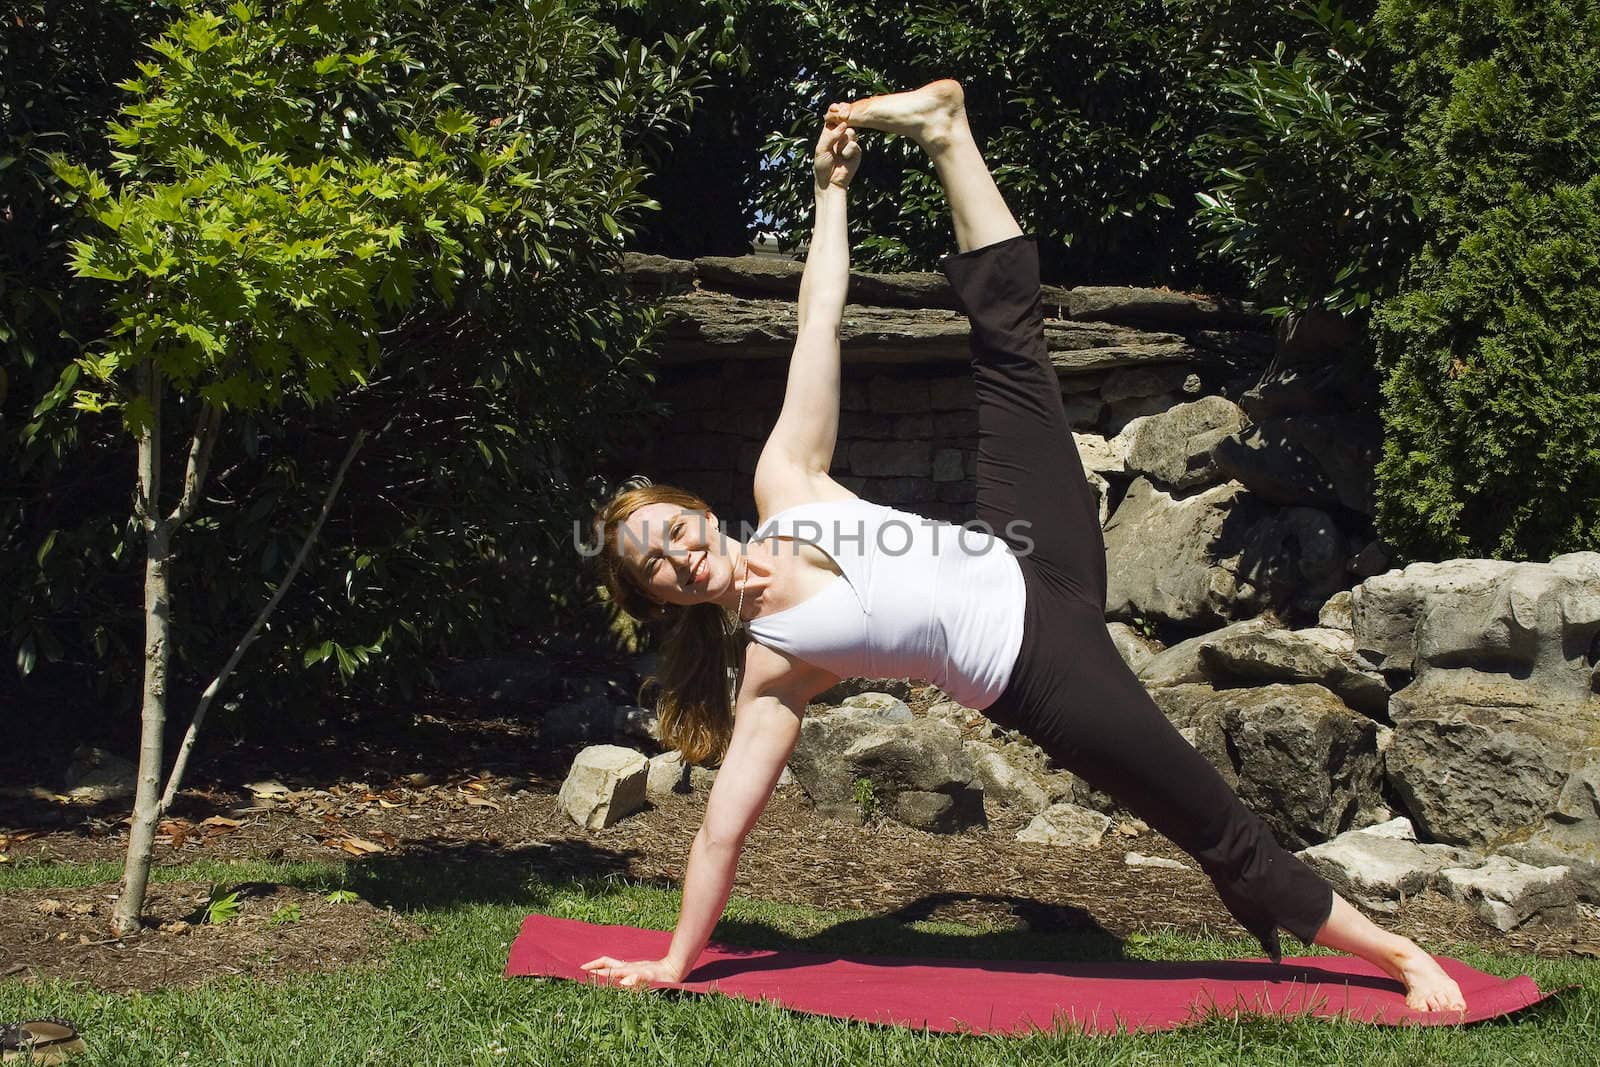 Yoga expert stretches to show her limberness for the camera.